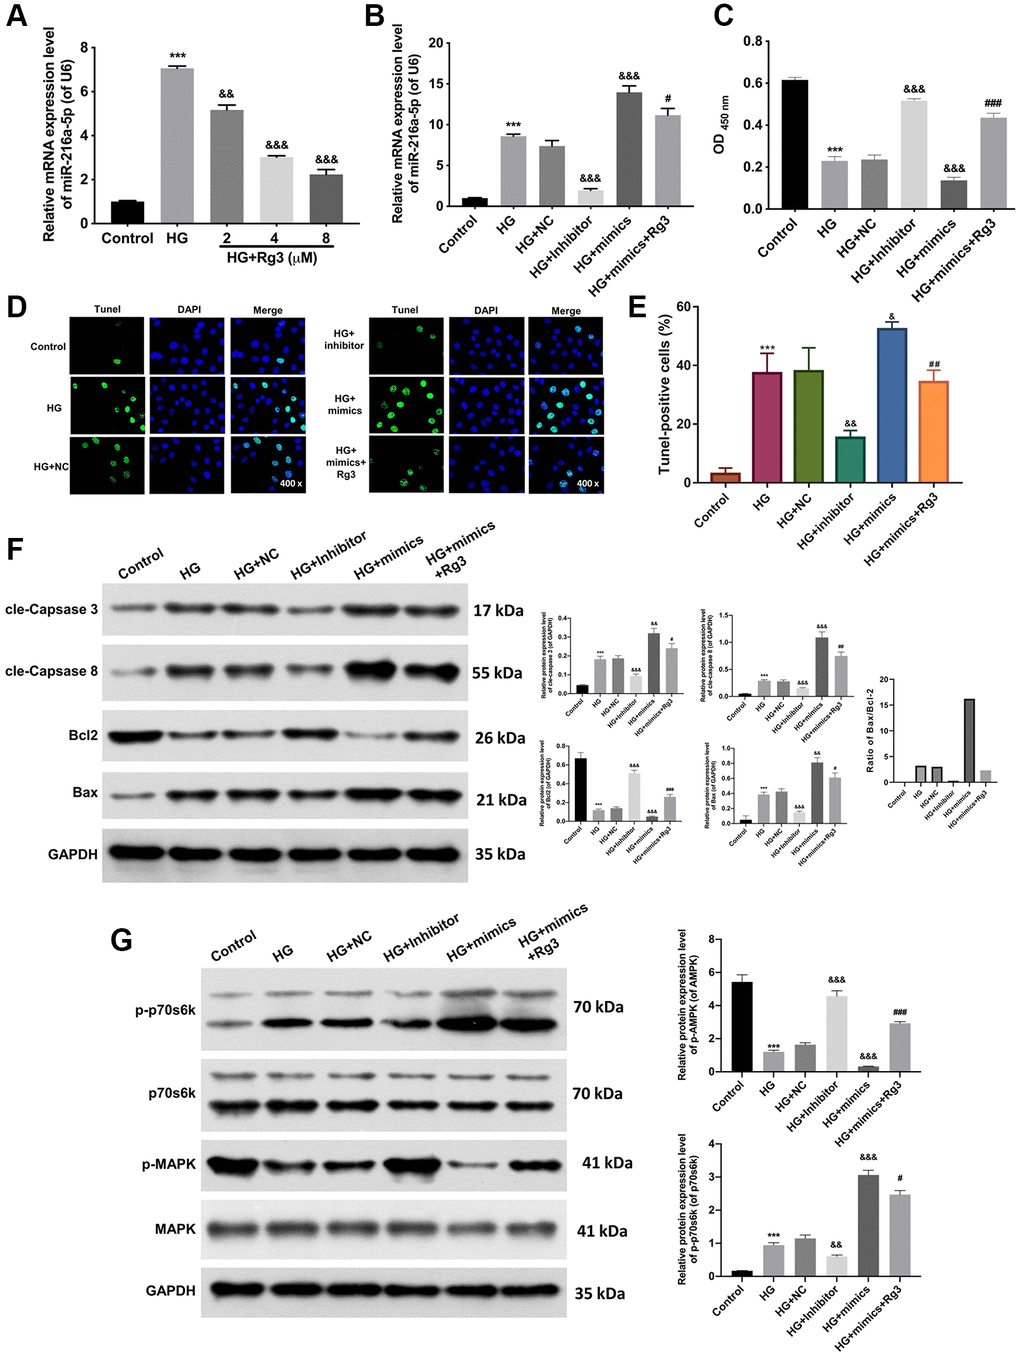 Rg3 enhances proliferation, attenuates apoptosis, and activates the MAPK pathway through the downregulation of miR-216a-5p in HG-induced SV40 MES 13. (A) qRT-PCR analysis for the evaluation of a miR-216a-5p expression in HG-induced SV40 MES 13 after processing with Rg3. (B) HG-induced SV40 MES 13 were transfected with miR-216a-5p inhibitor, miR-216a-5p mimics or NC, and treated with Rg3. The expression change of miR-216a-5p was identified by applying qRT-PCR. (C) CCK-8 assay for the examination of cell proliferation in SV40 MES 13 treated in the same way as B. (D) TUNEL staining revealed the change of cell apoptosis (Magnification, 200×). (E) TUNEL-positive cells were quantified. (F) The changes of cle-Caspase 3, cle-Caspase 8, Bcl2, and Bax expressions were confirmed through the application of western blot. (G) Western blot analysis of p-p70s6k, p70s6k, P-MAPK, and MAPK expressions in each group. ***P &&P &&&P #P ##P ###P 